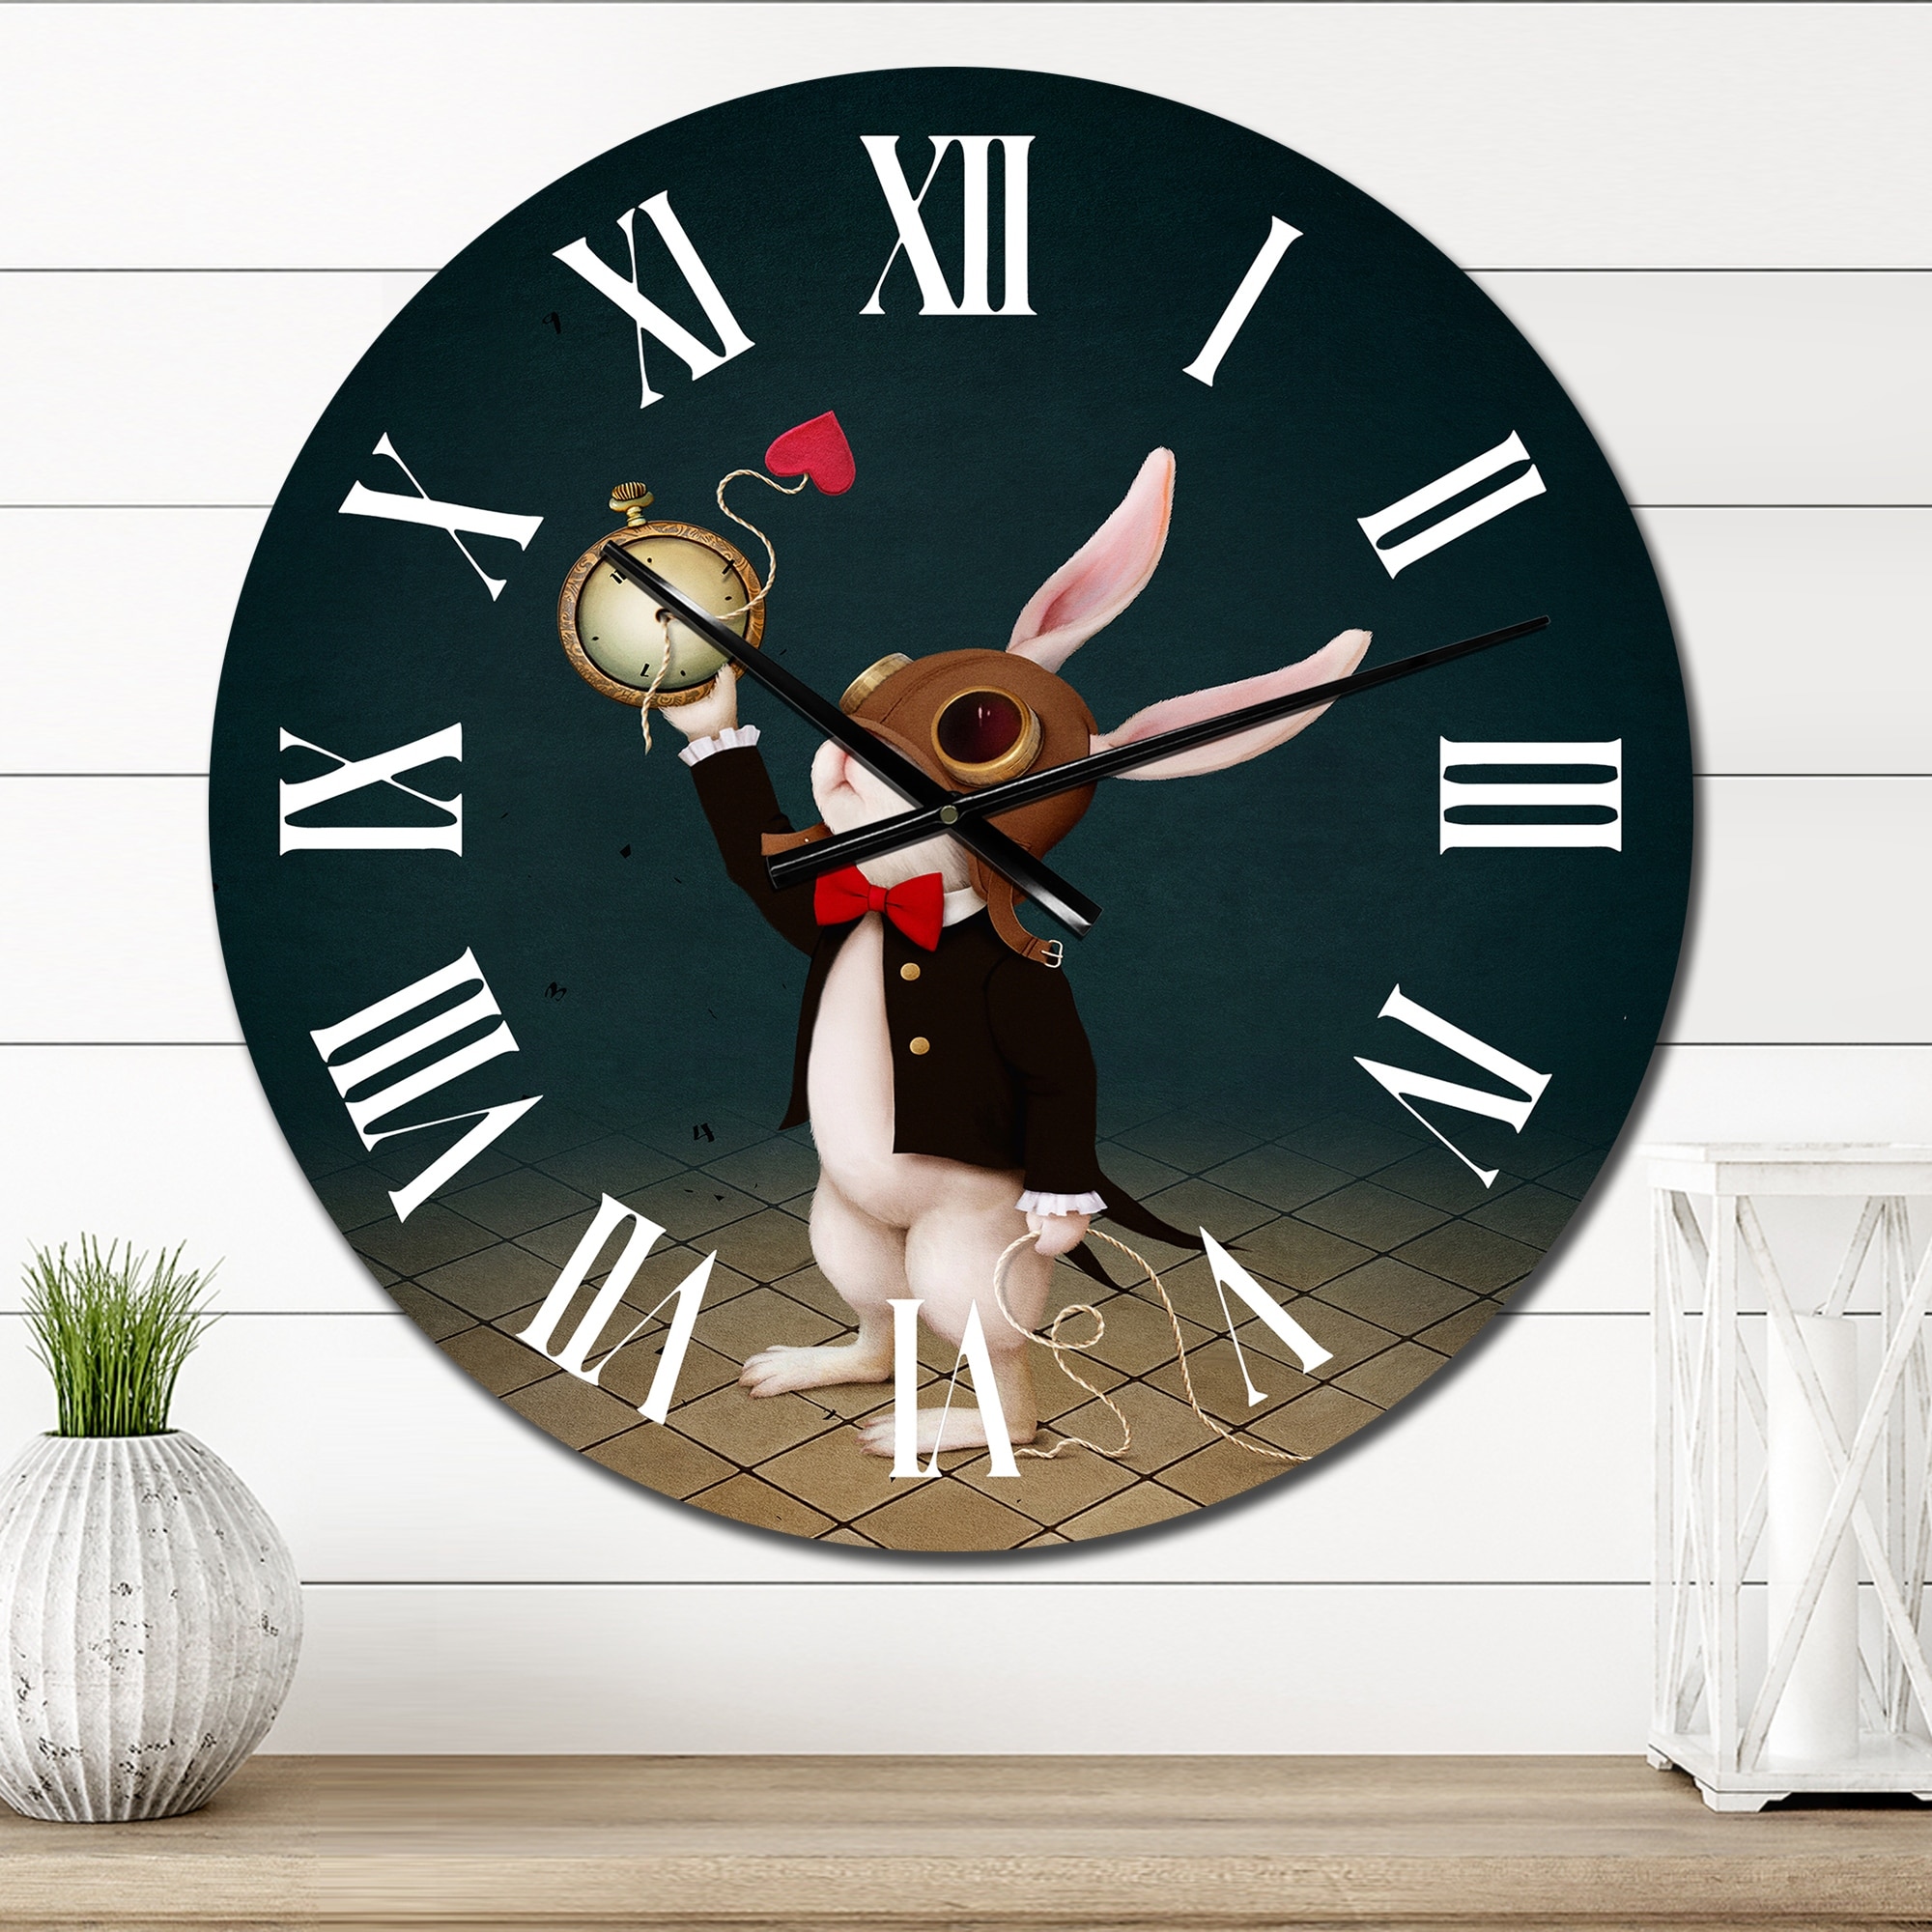 https://ak1.ostkcdn.com/images/products/is/images/direct/b999d49a085f29ed1730012a71783a1a895df6d0/Designart-%27White-Rabbit-Alice-In-Wonderland-I%27-Children%27s-Art-wall-clock.jpg